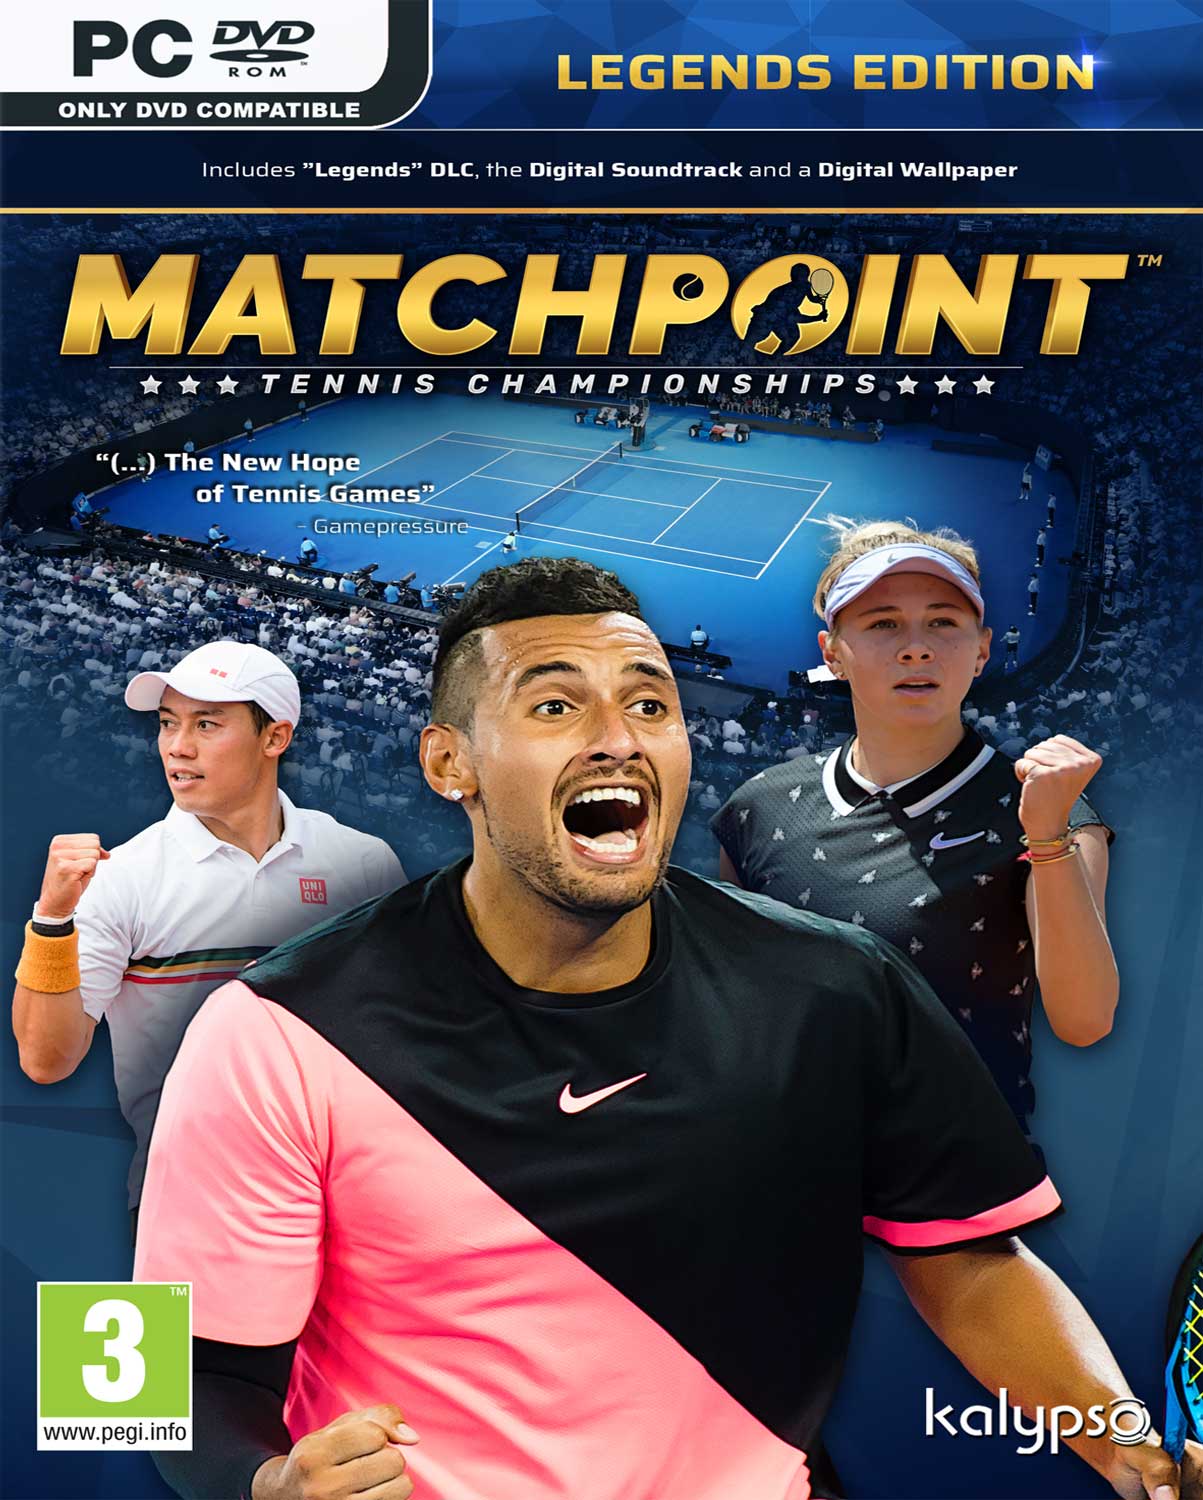 PCG Matchpoint: Tennis Championships - Legends Edition 